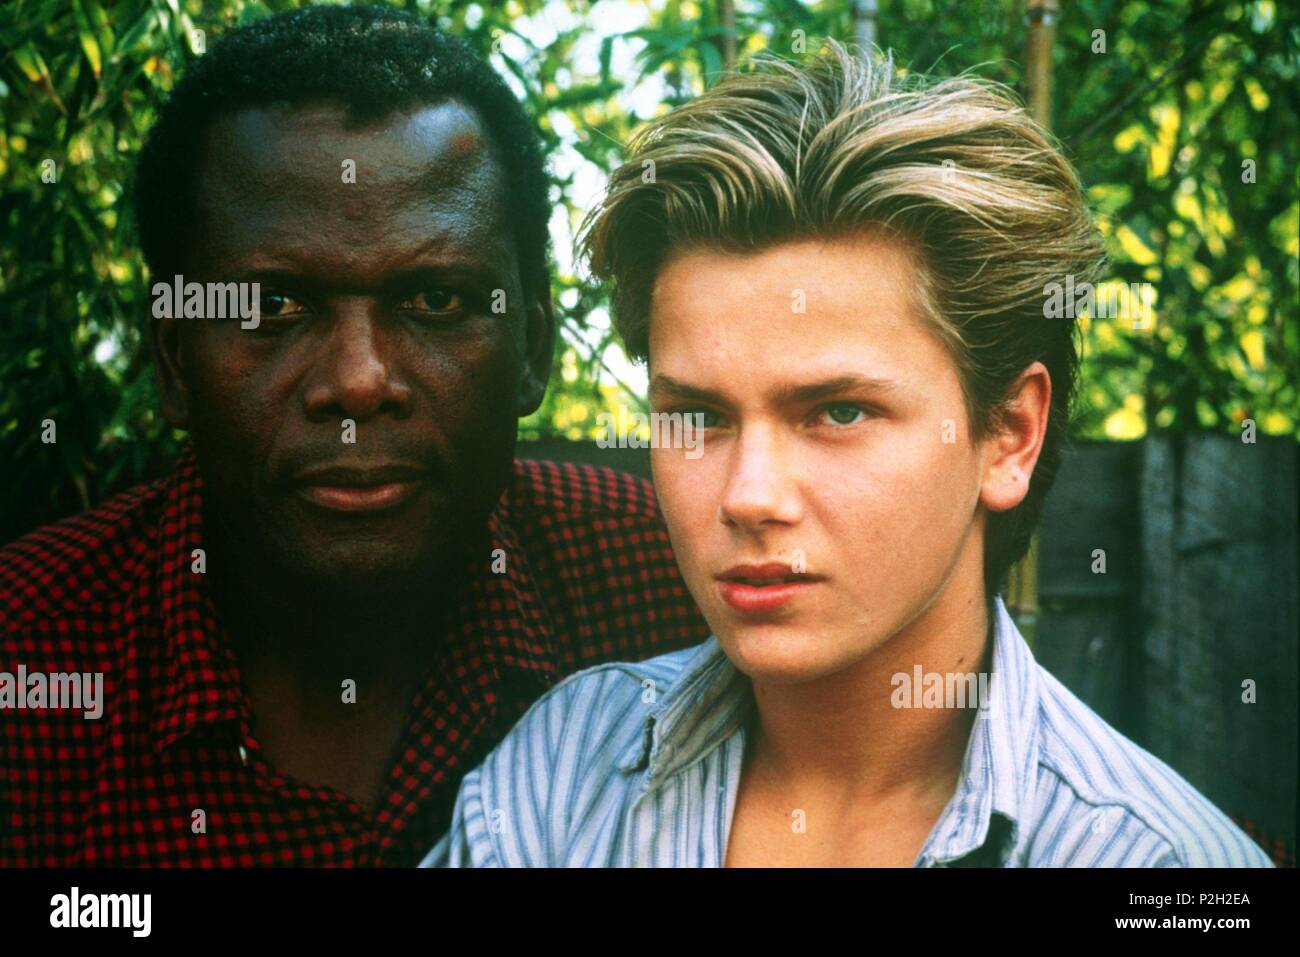 Description: Jul 01, 1988; Hollywood, CA, USA; Actors SIDNEY POITIER as Roy Parmenter and RIVER PHOENIX as Jeff Grant star in the drama thriller 'Little Nikita' directed by Richard Benjamin..  Original Film Title: LITTLE NIKITA.  English Title: LITTLE NIKITA.  Film Director: RICHARD BENJAMIN.  Year: 1988.  Stars: SIDNEY POITIER; RIVER PHOENIX. Stock Photo